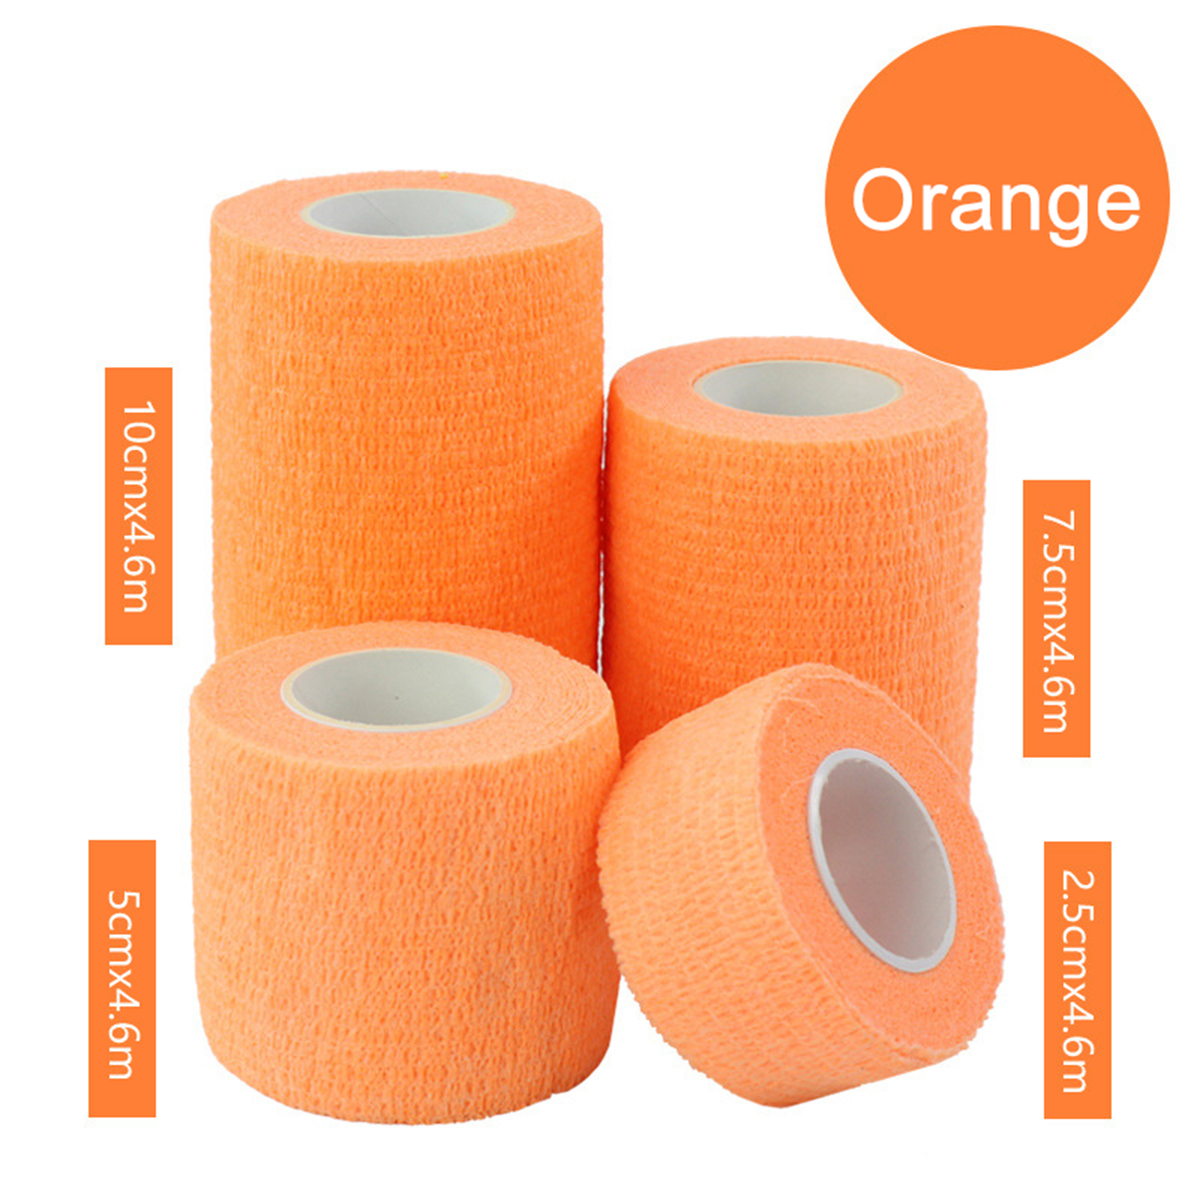 Colorful-Self-Adhesive-Sport-Pet-Support-Elastic-Bandage-Finger-Joint-Wrap-Injury-Tape-1147126